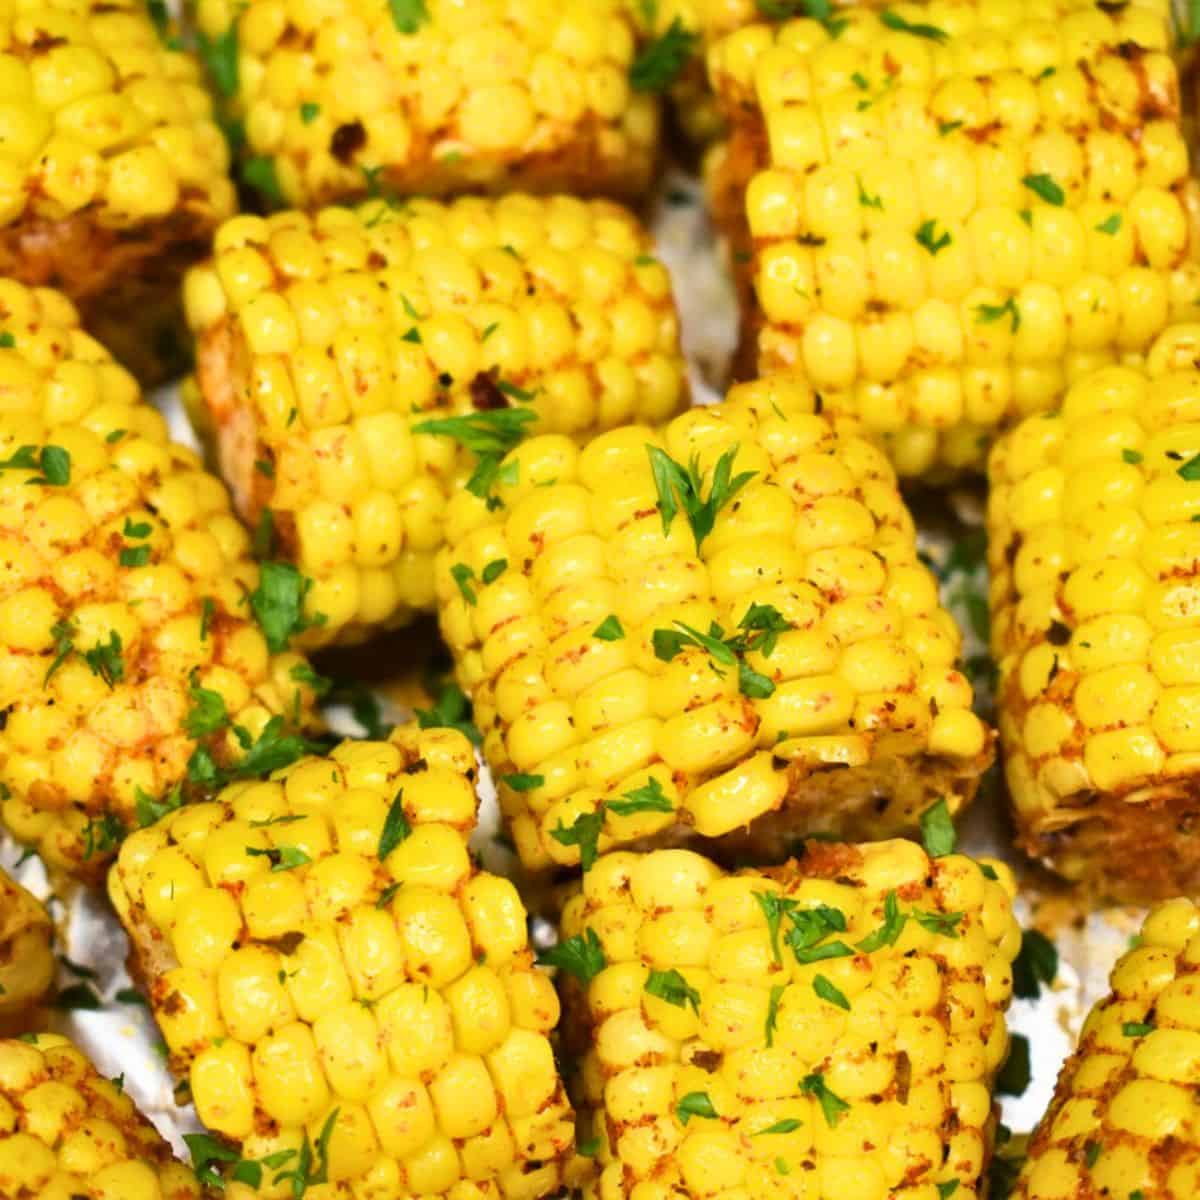 Cut corn cobs, seasoned and garnished with chopped parsley.